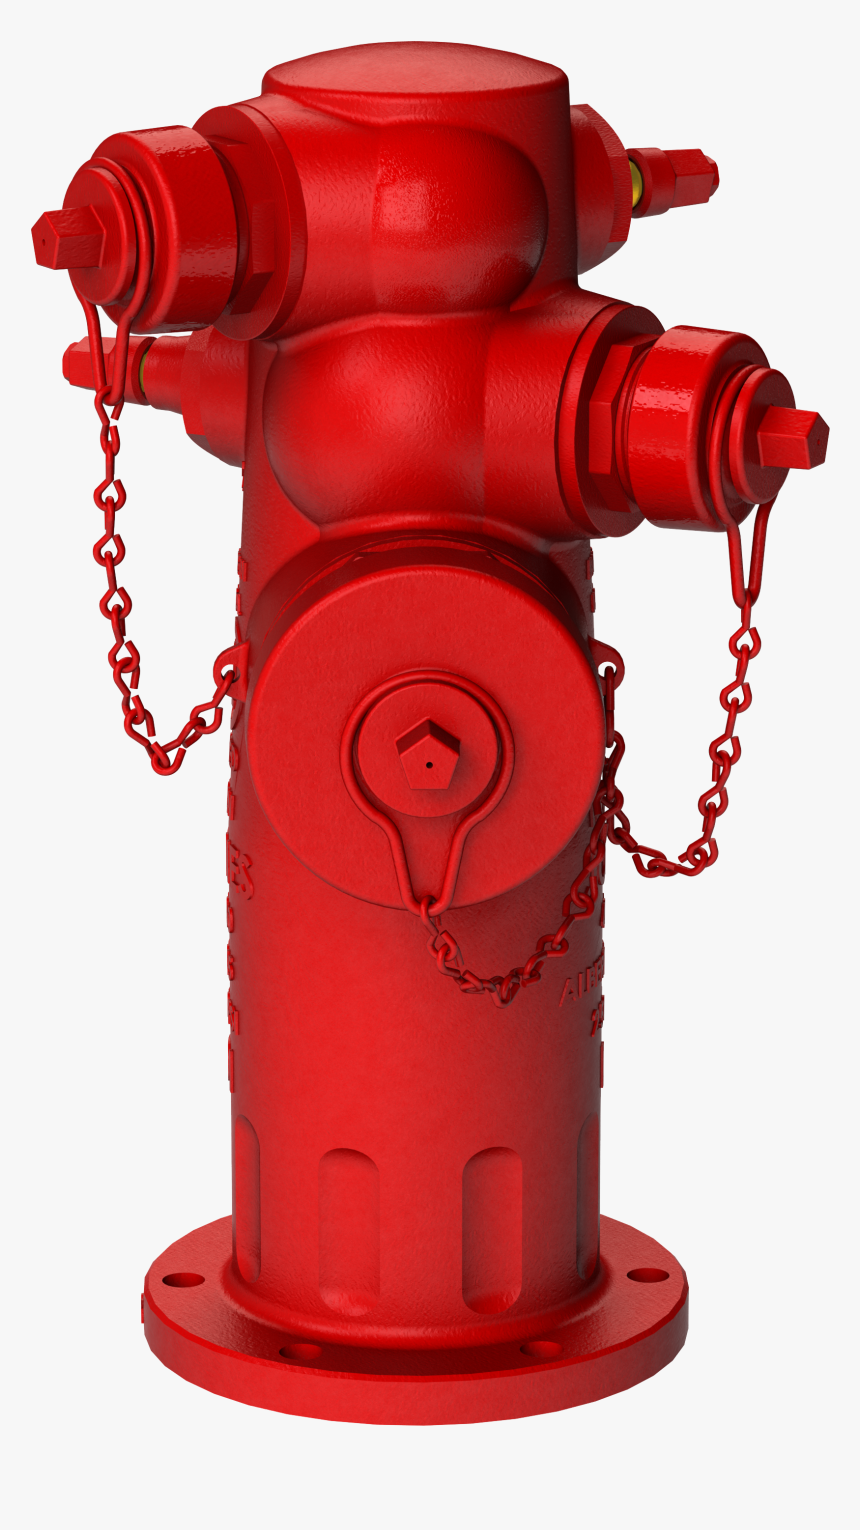 Hydrant Png, Transparent Png, Free Download